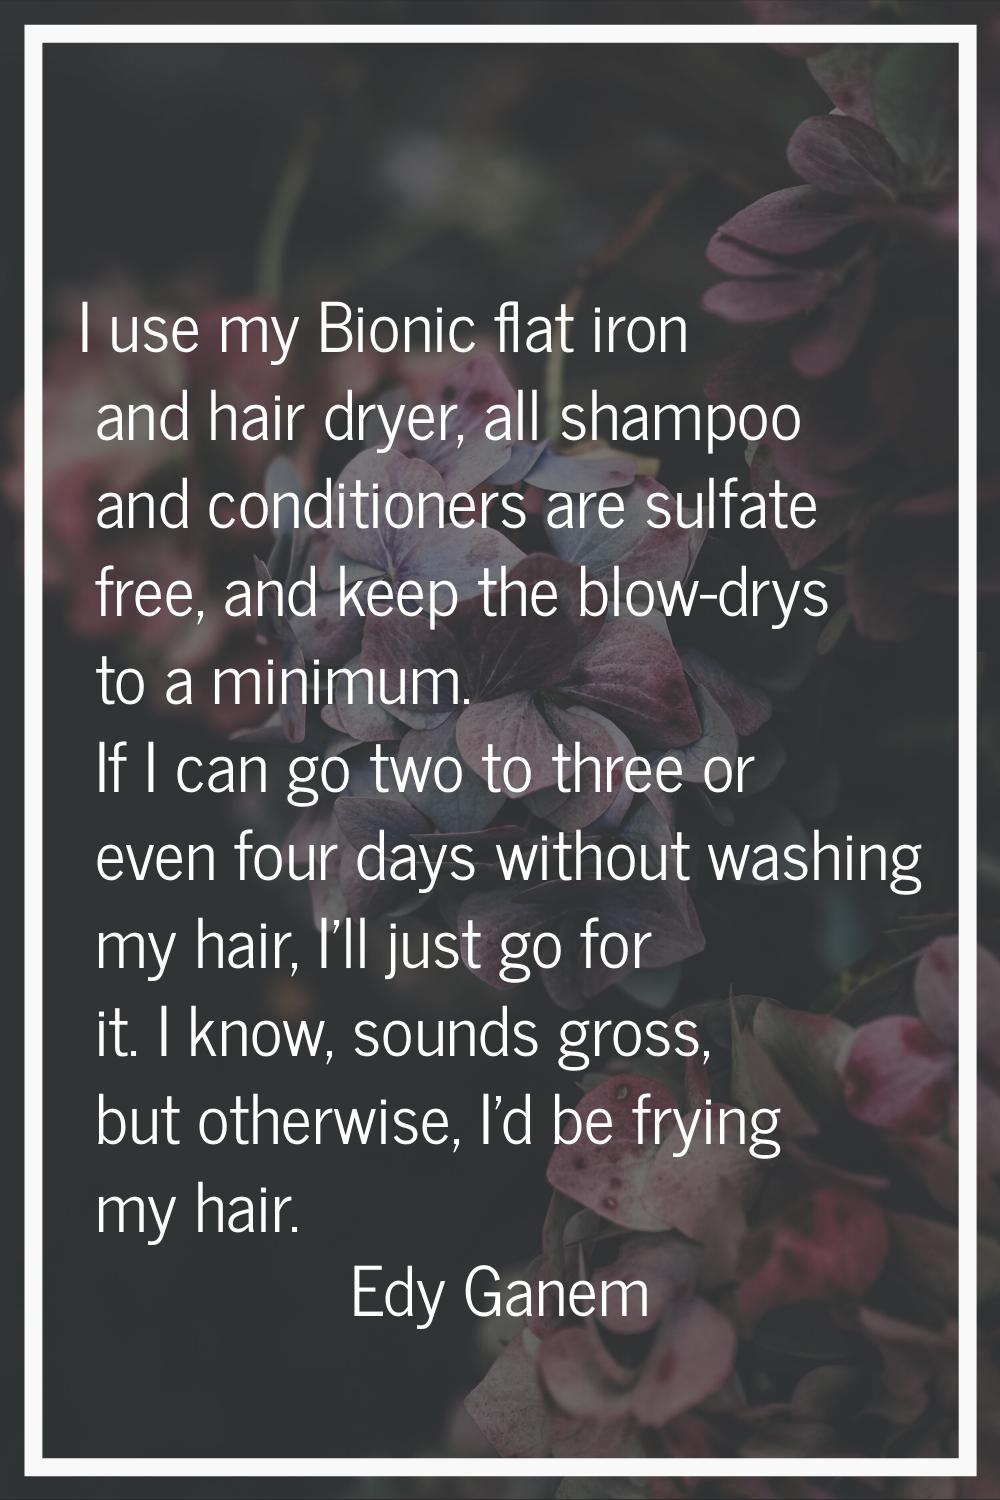 I use my Bionic flat iron and hair dryer, all shampoo and conditioners are sulfate free, and keep t